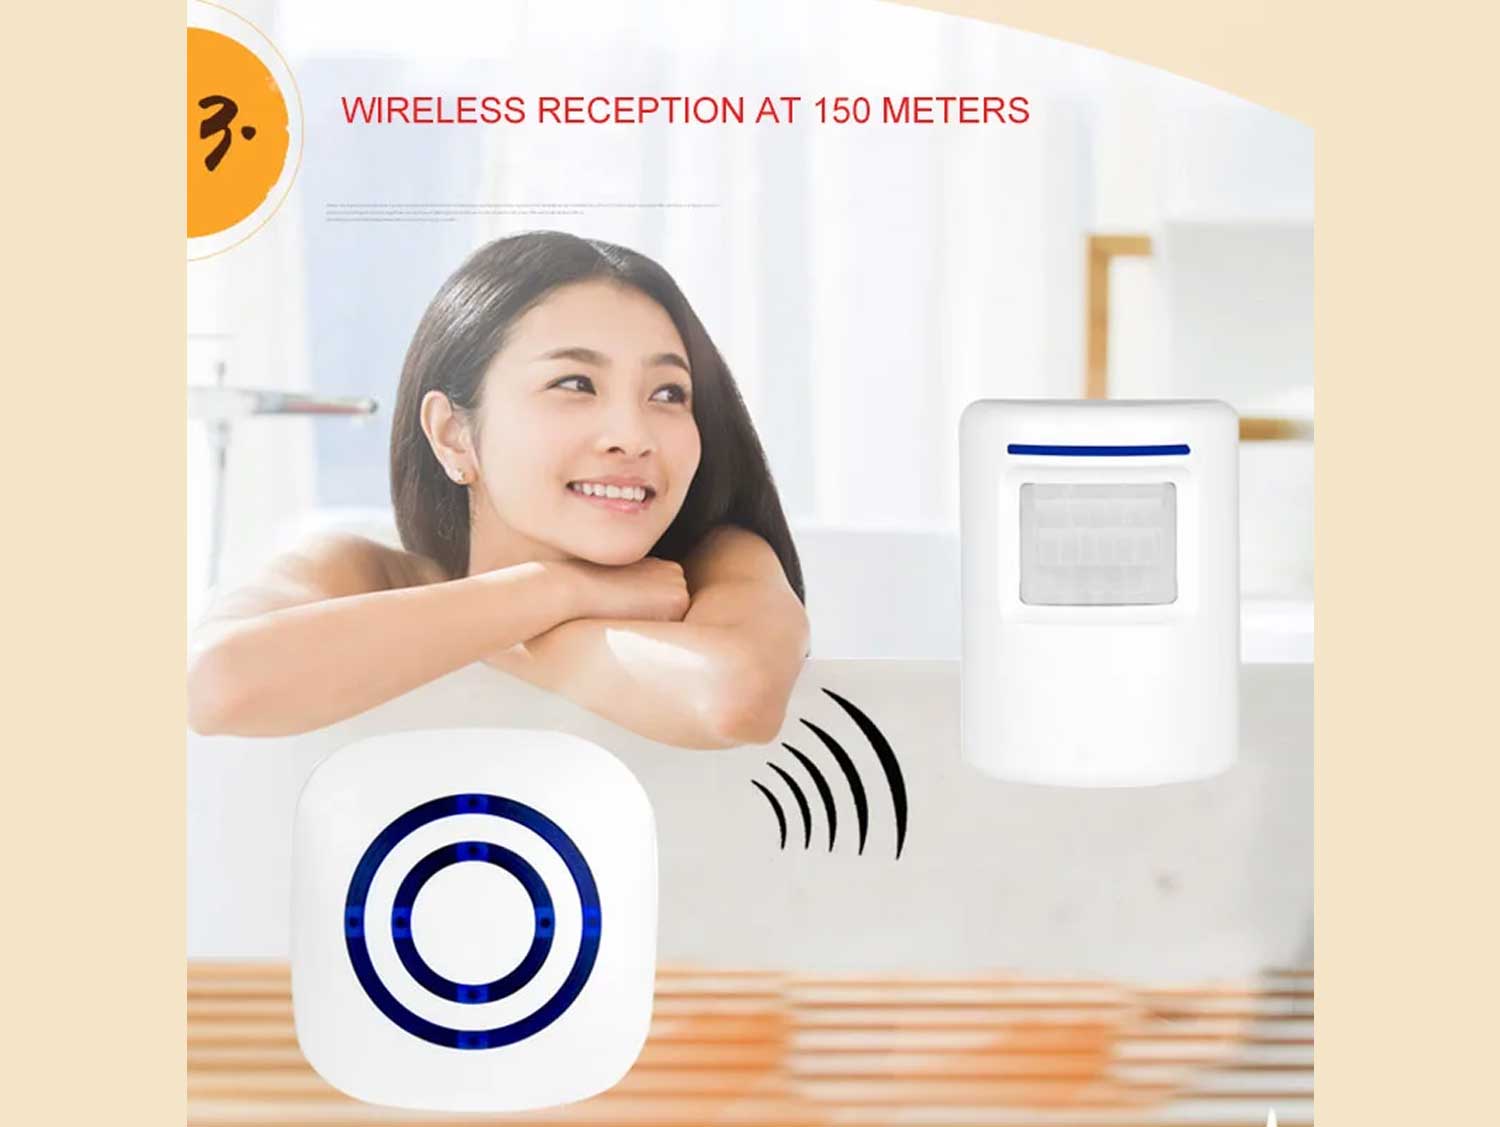 Wireless Infrared PIR Motion Sensor And Doorbell or Chime